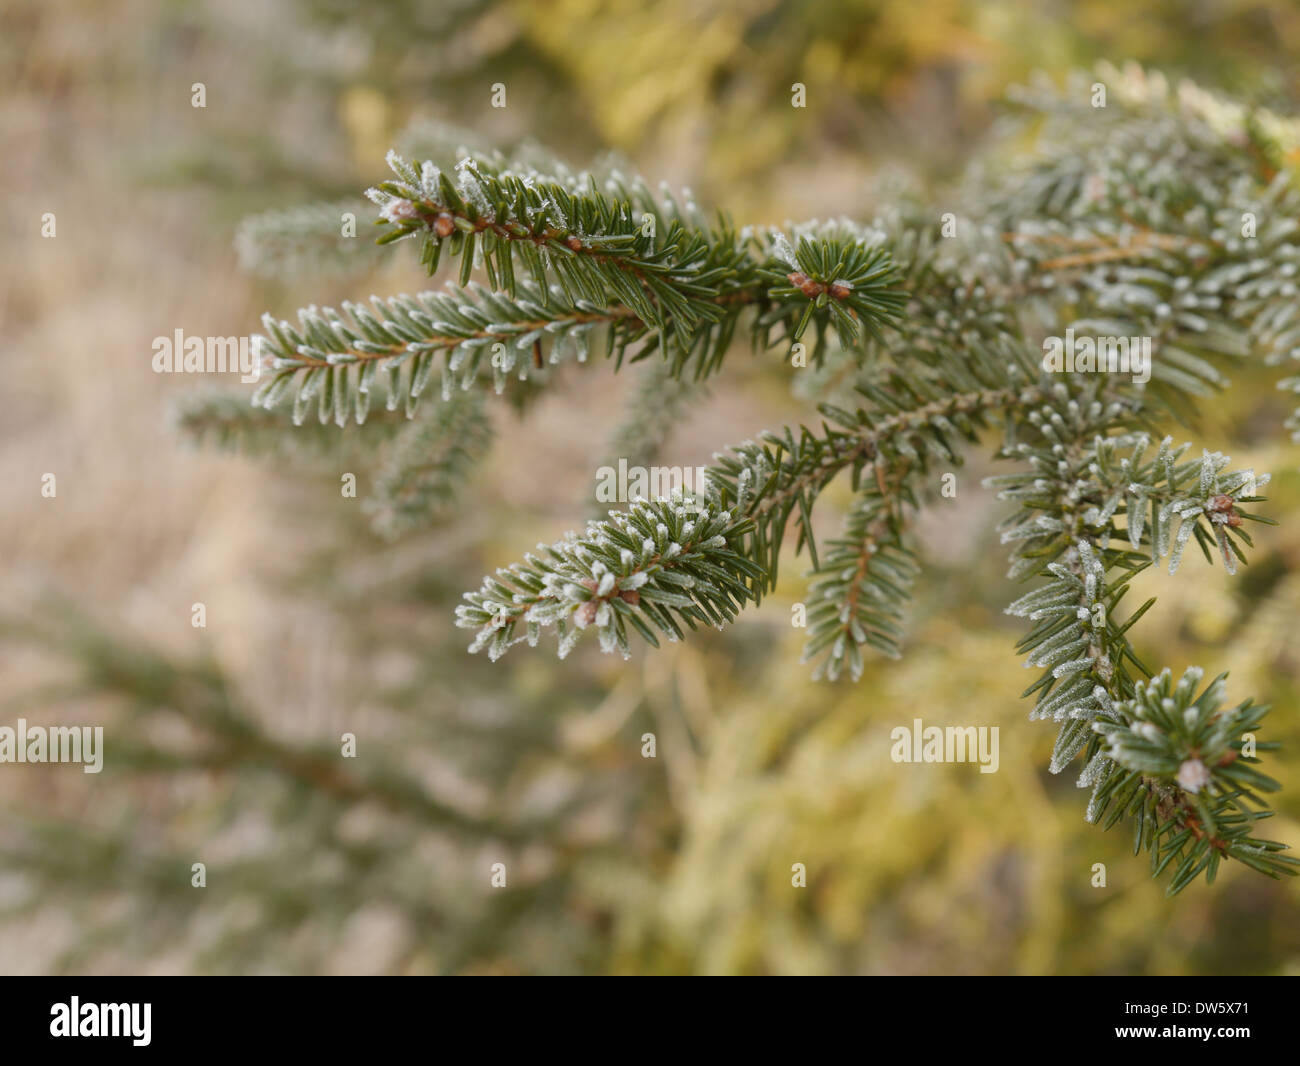 White frosted spruce fir branch Stock Photo